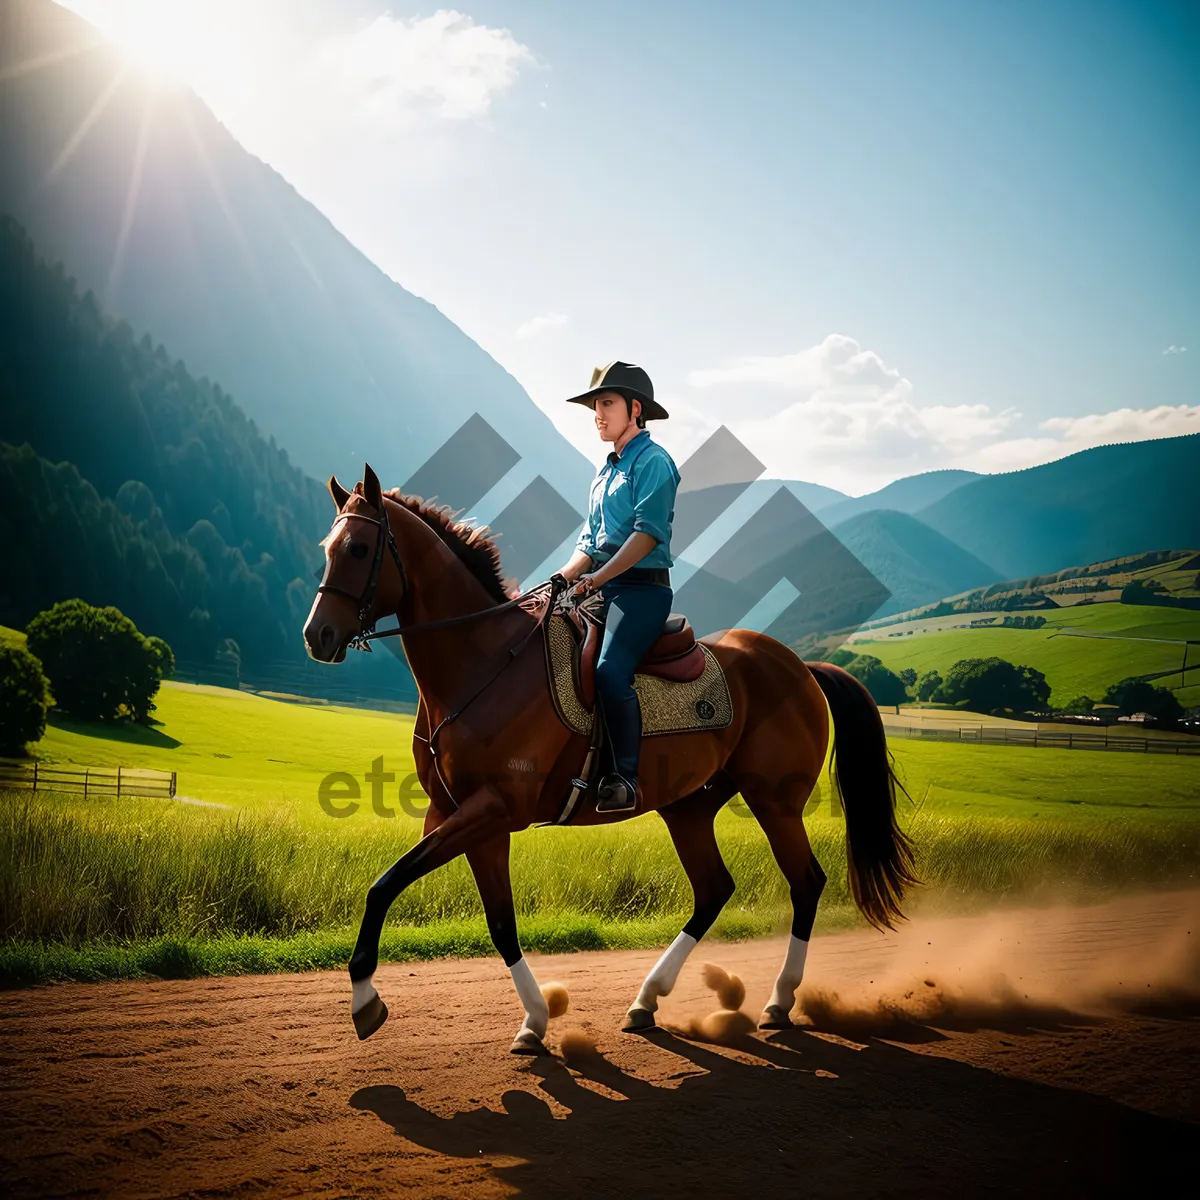 Picture of Equestrian Cowboy Riding Thoroughbred Horse in Rural Field